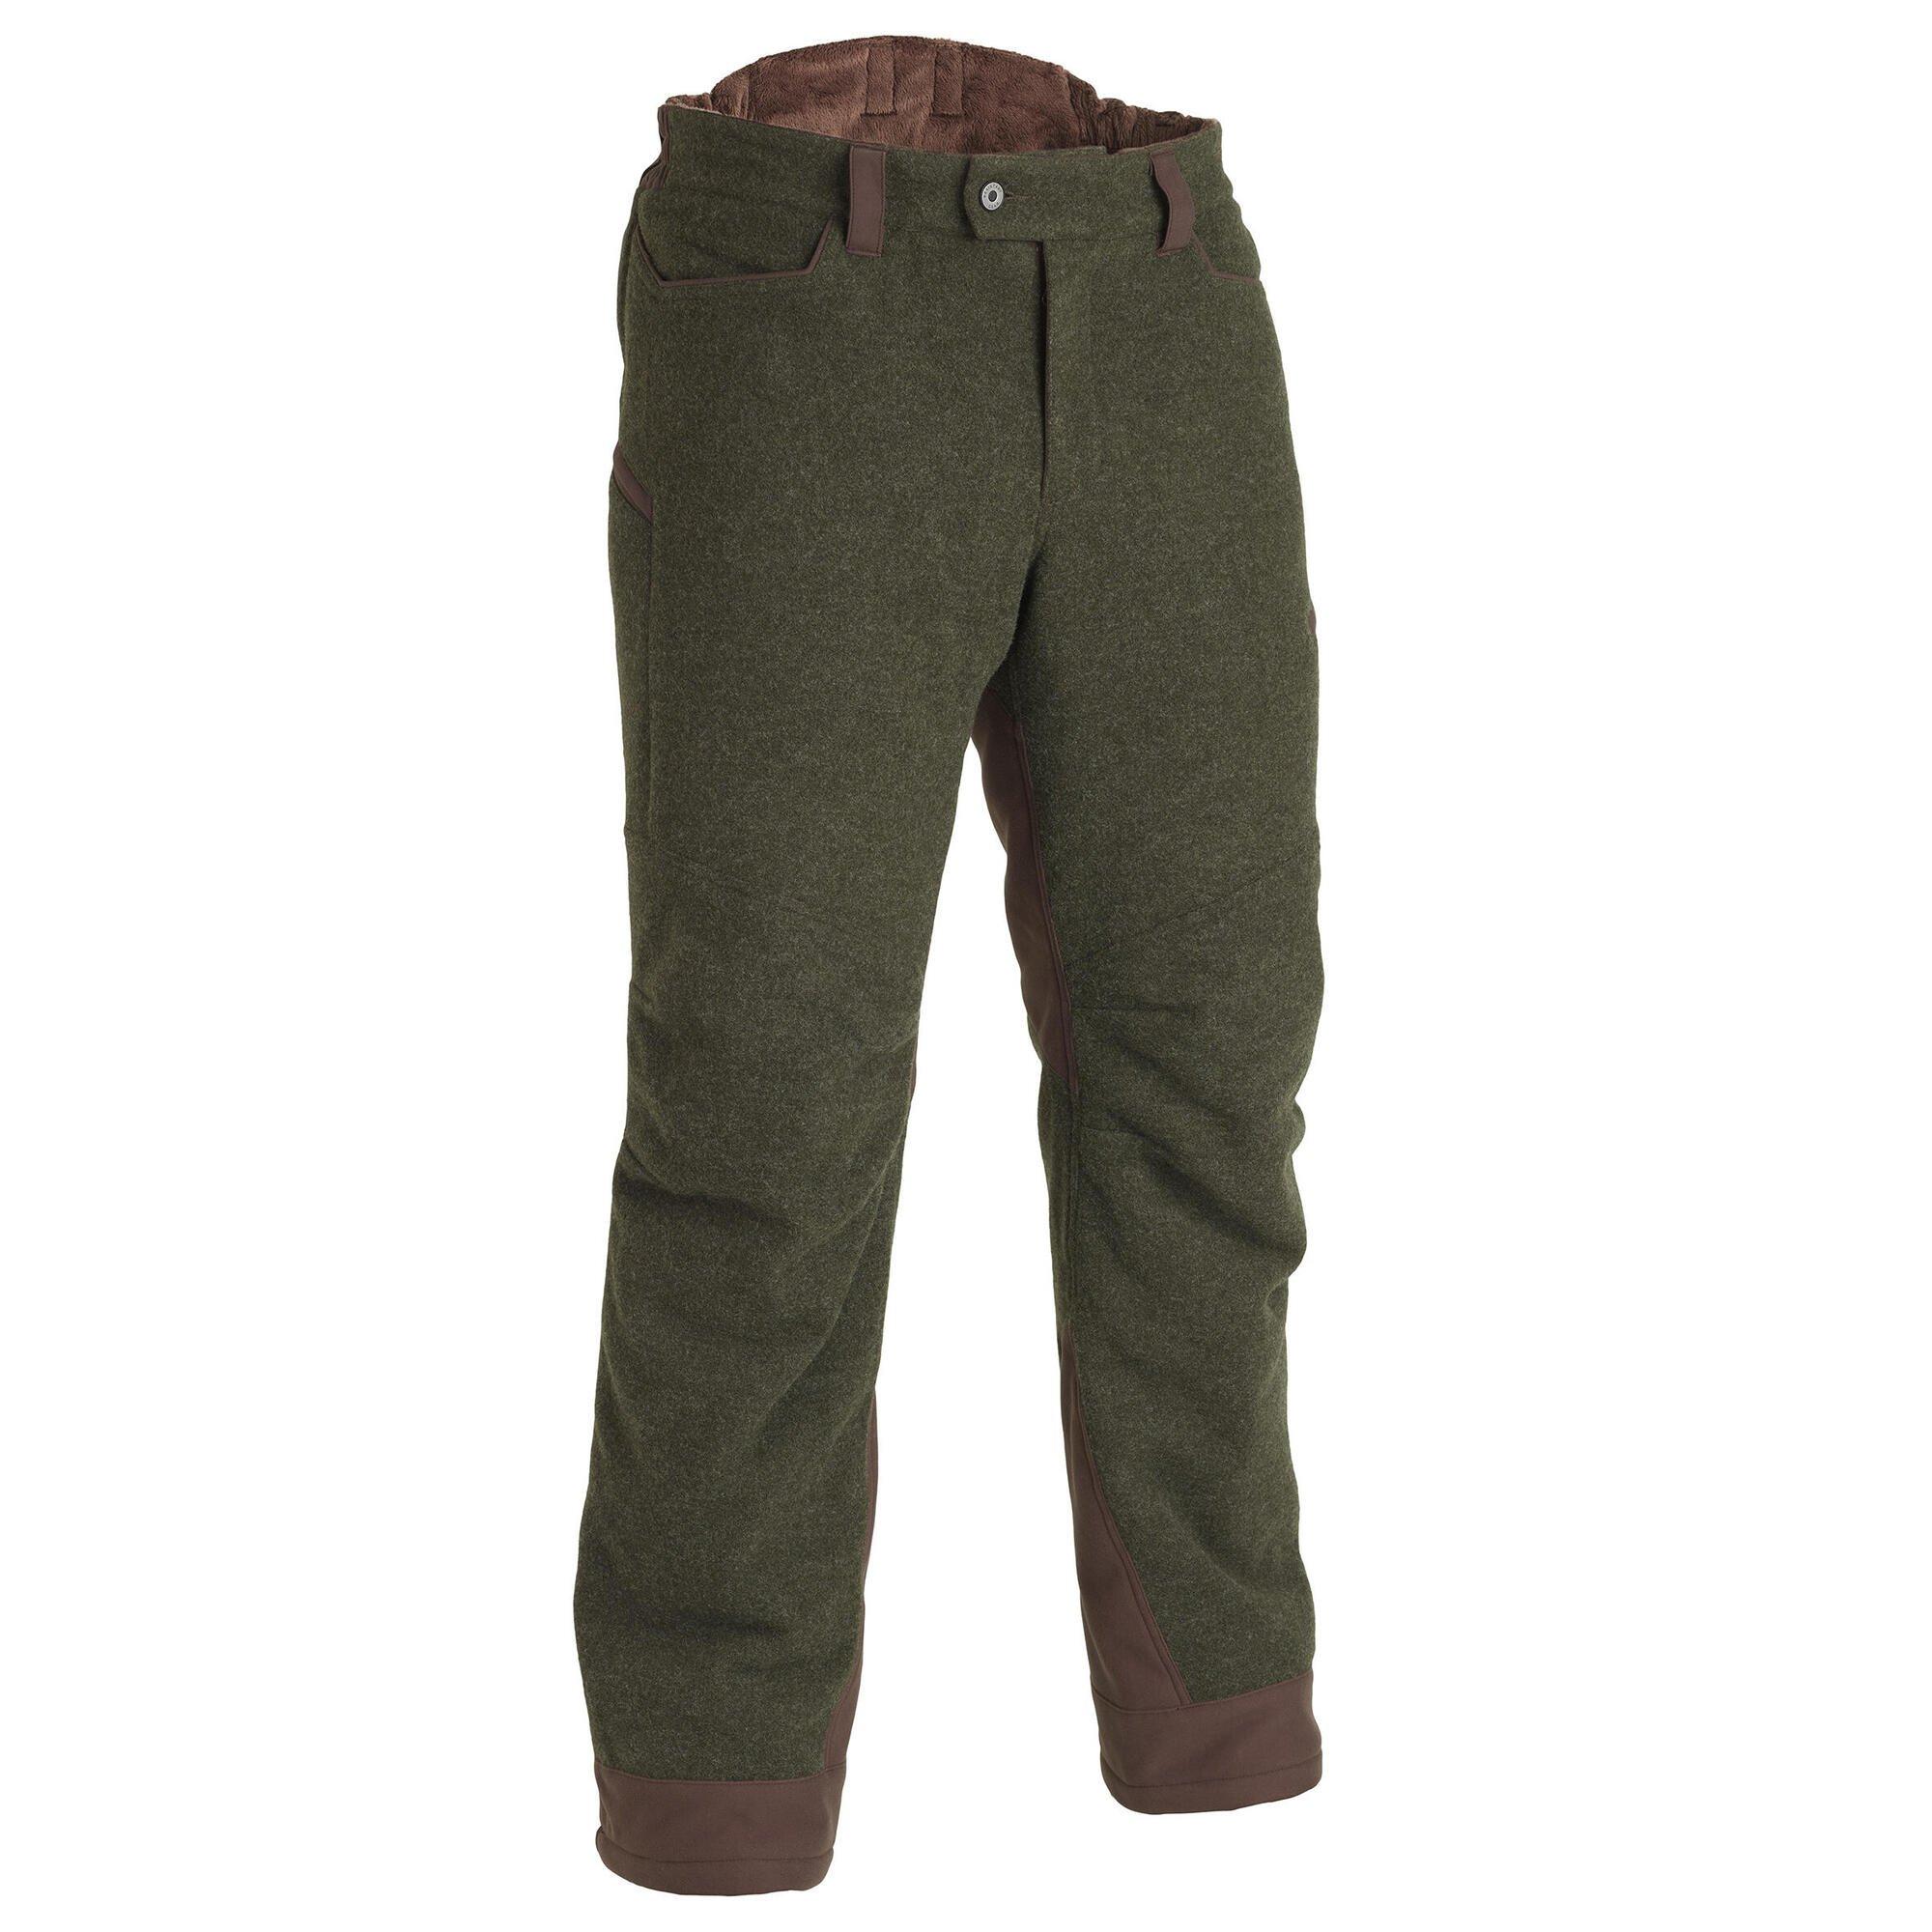 Decathlon Country Sport Warm Silent Wool Trousers 900